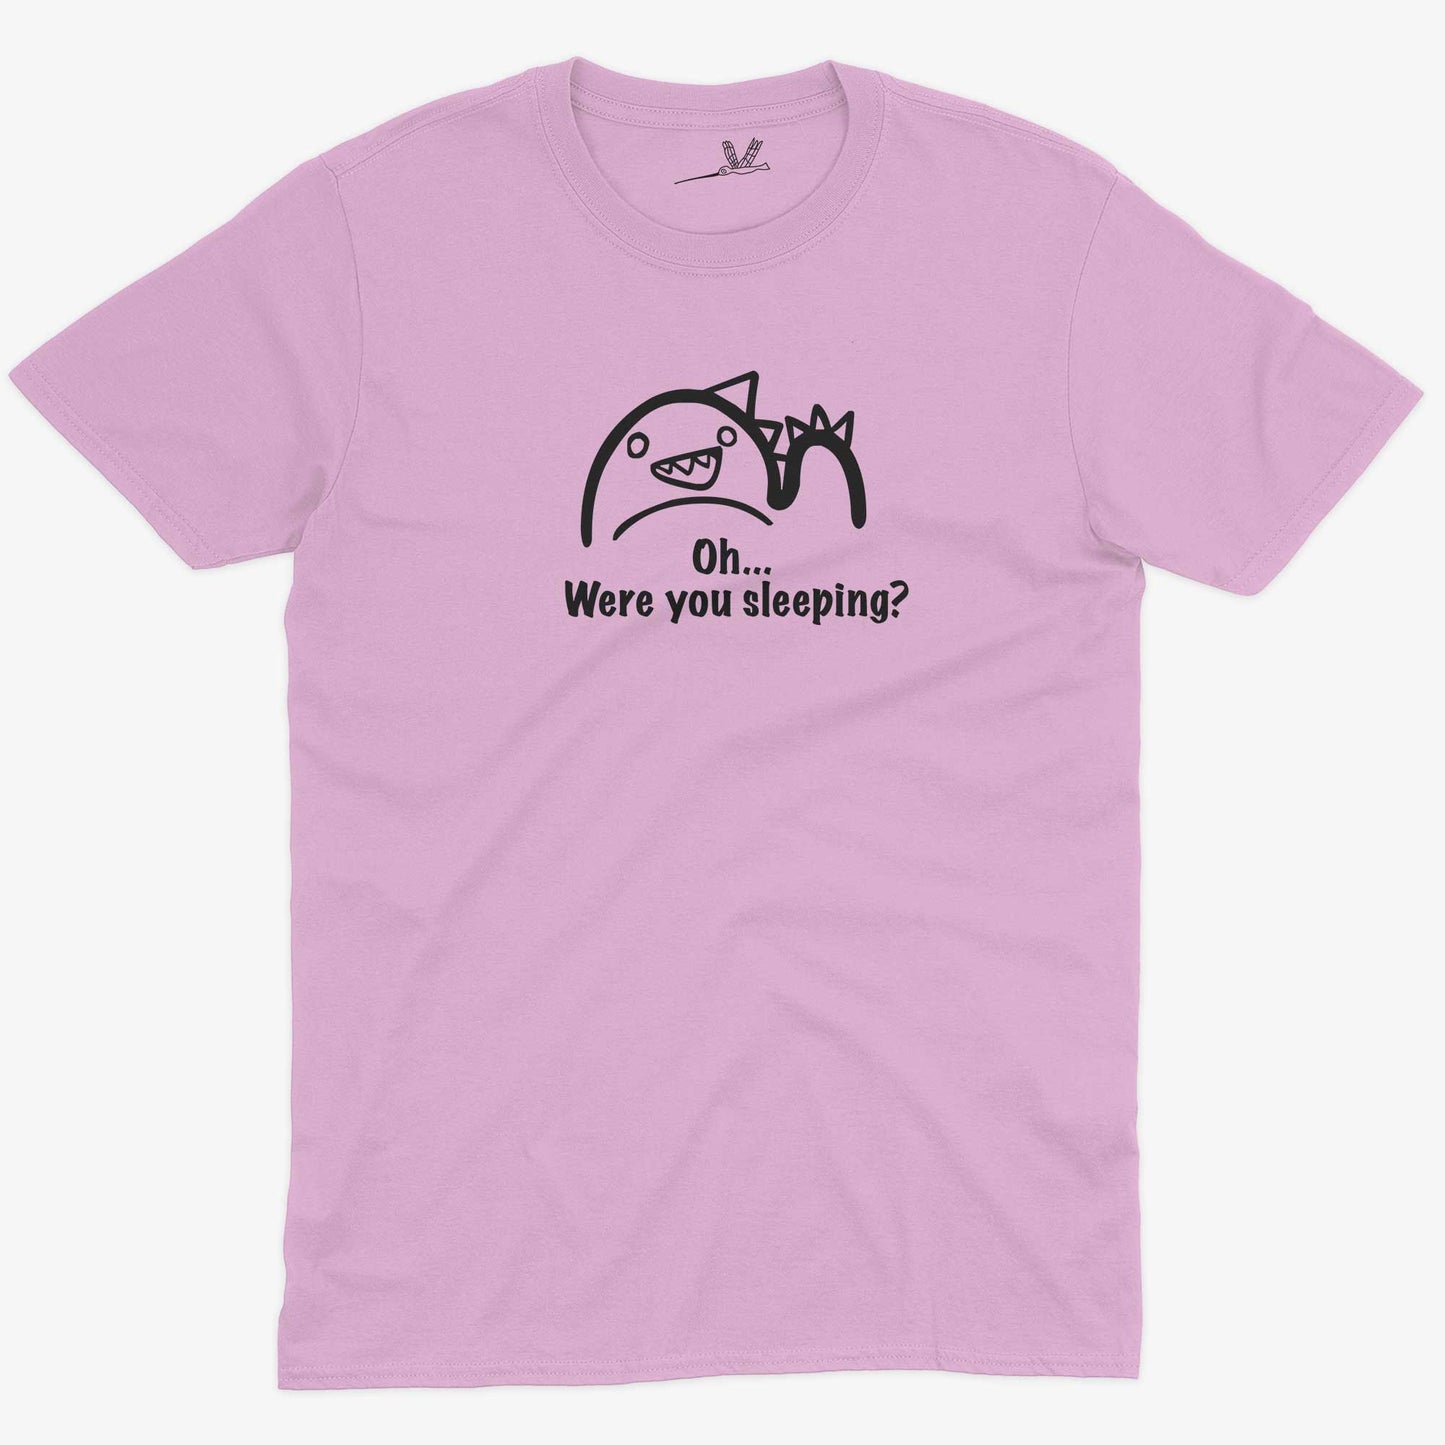 Oh...Were you sleeping? Women's or Unisex Funny T-shirt-Pink-Unisex